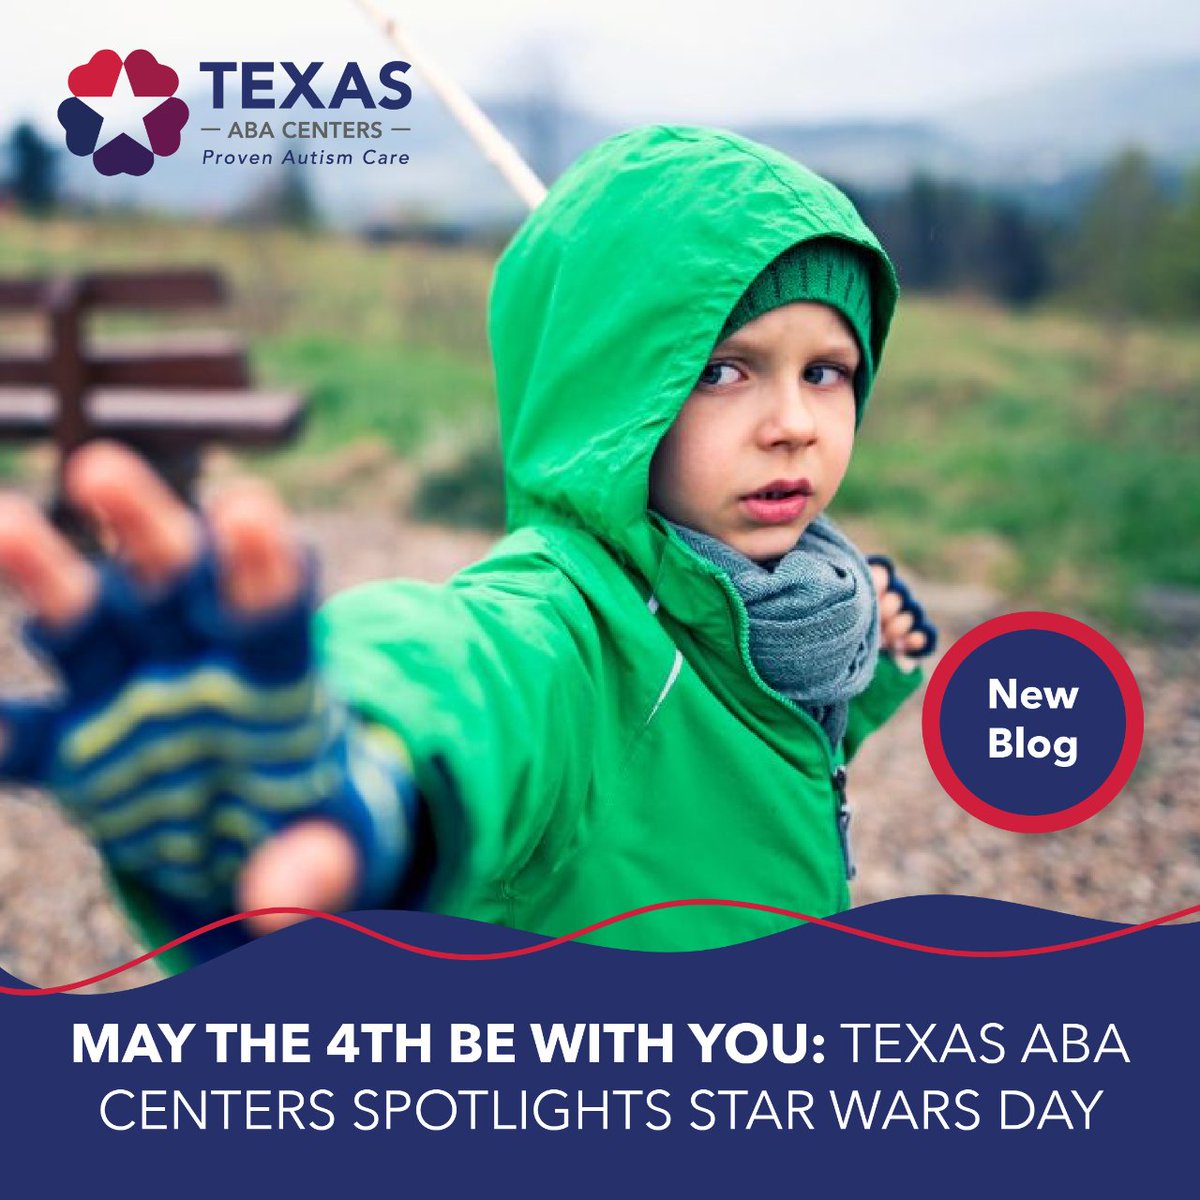 Texas ABA Centers understands the impact of Star Wars on children, especially those on the spectrum. Explore how parents can leverage this enthusiasm for meaningful engagement and growth. Read here: bit.ly/txababa050424x.

#TexasABACenters #BlogPost #NewArticle #ABABlog